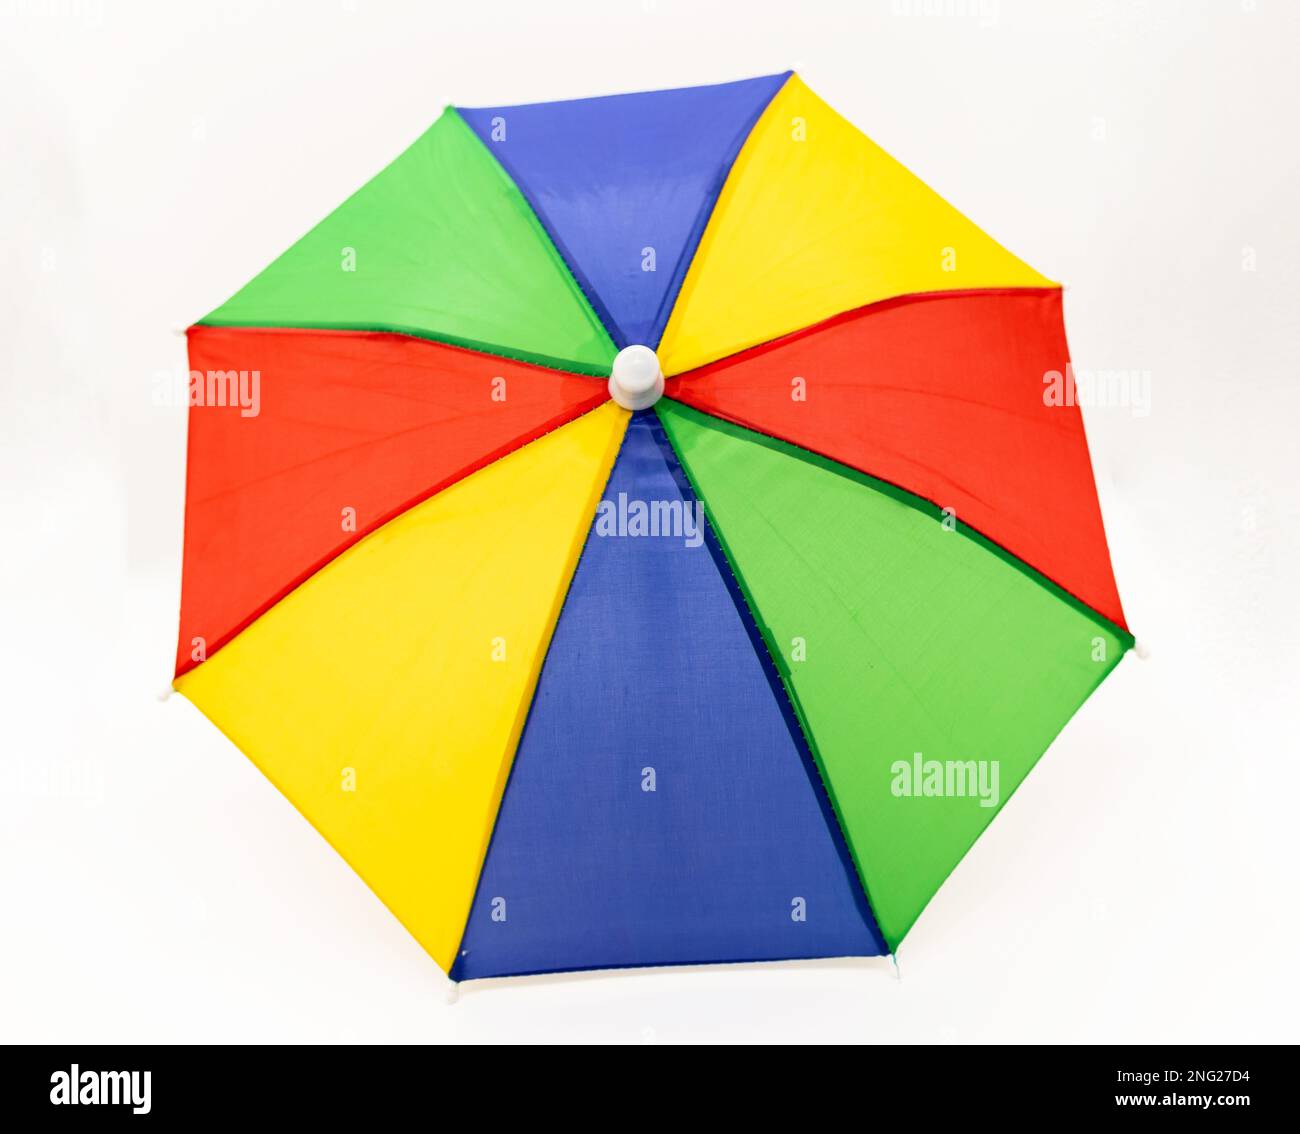 Traditional umbrella of carnival party traditional frevo umbrella of recife, umbrella of brazil, brazil carnival, umbrella of frevo Stock Photo